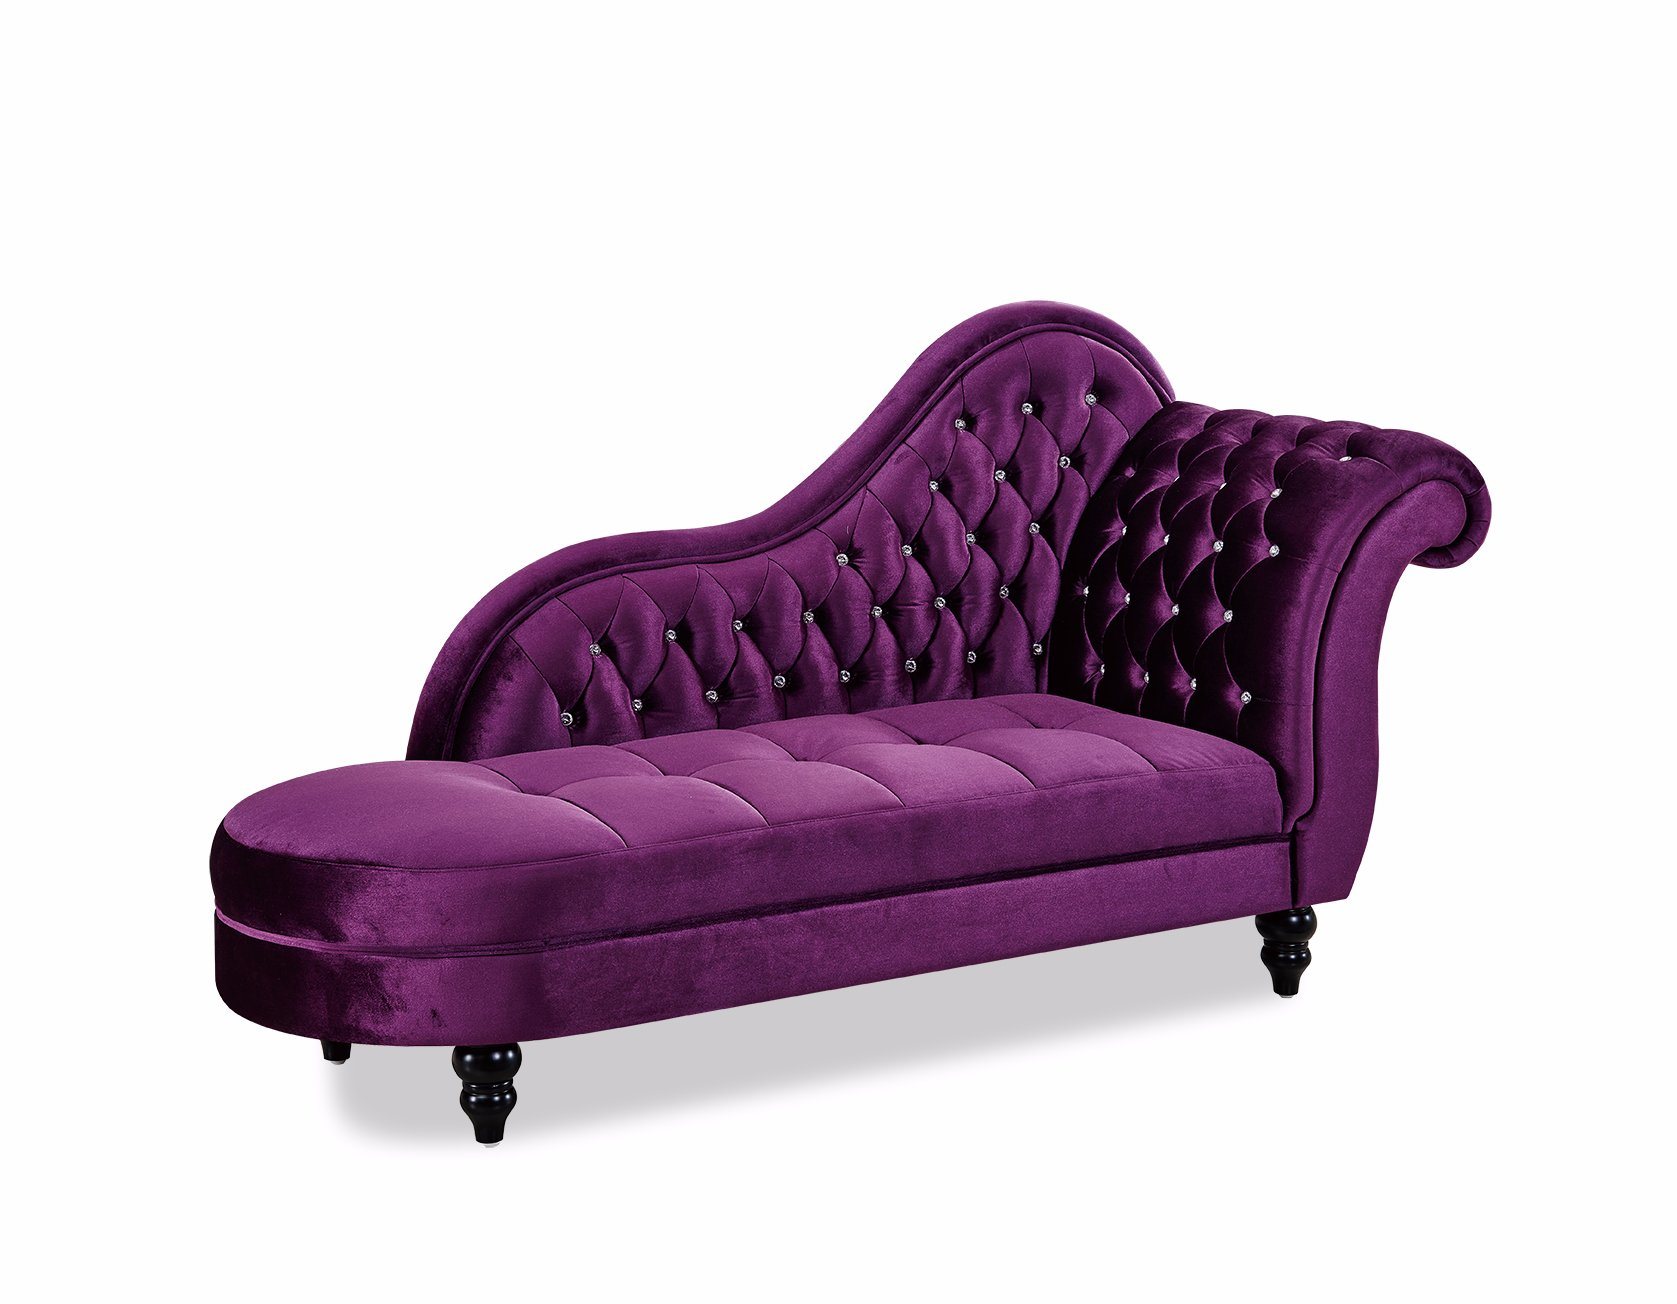 Crystal Fabric Chaise Lounge